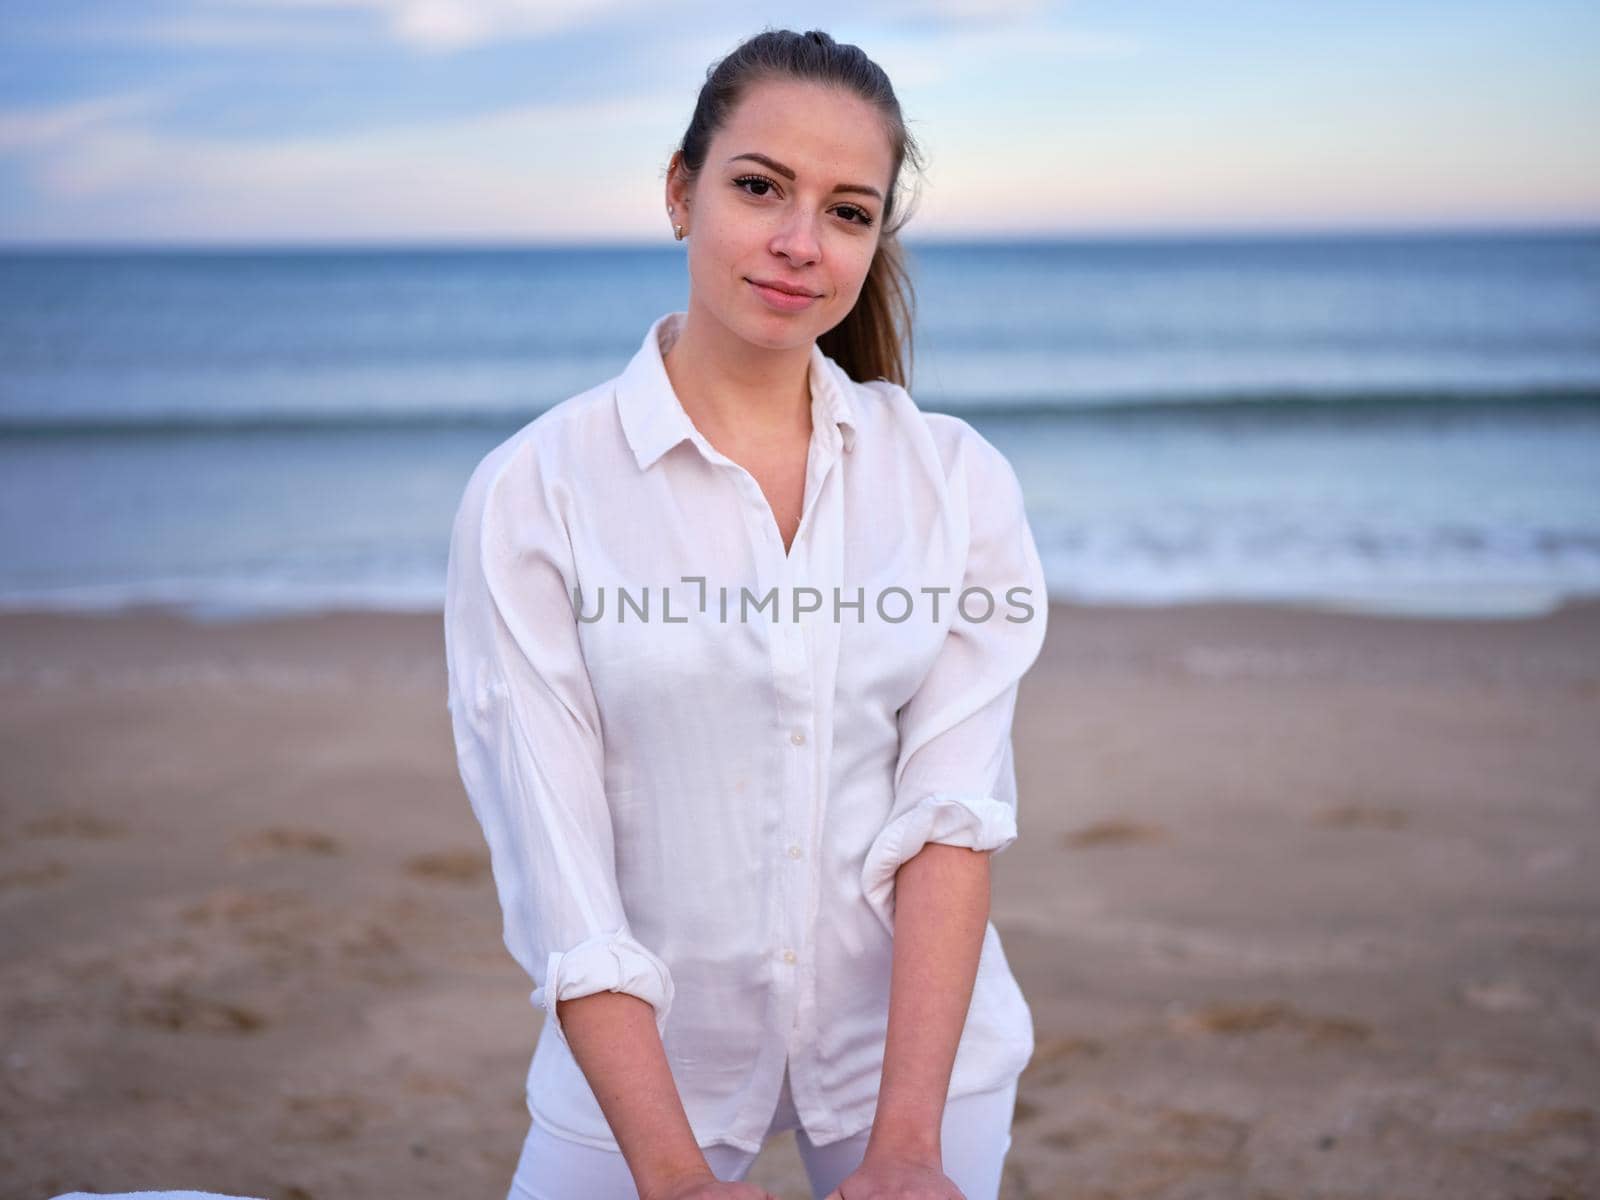 Front view of a young chiromassage therapist dressed in white standing on a beach in Valencia with the sea in the background.